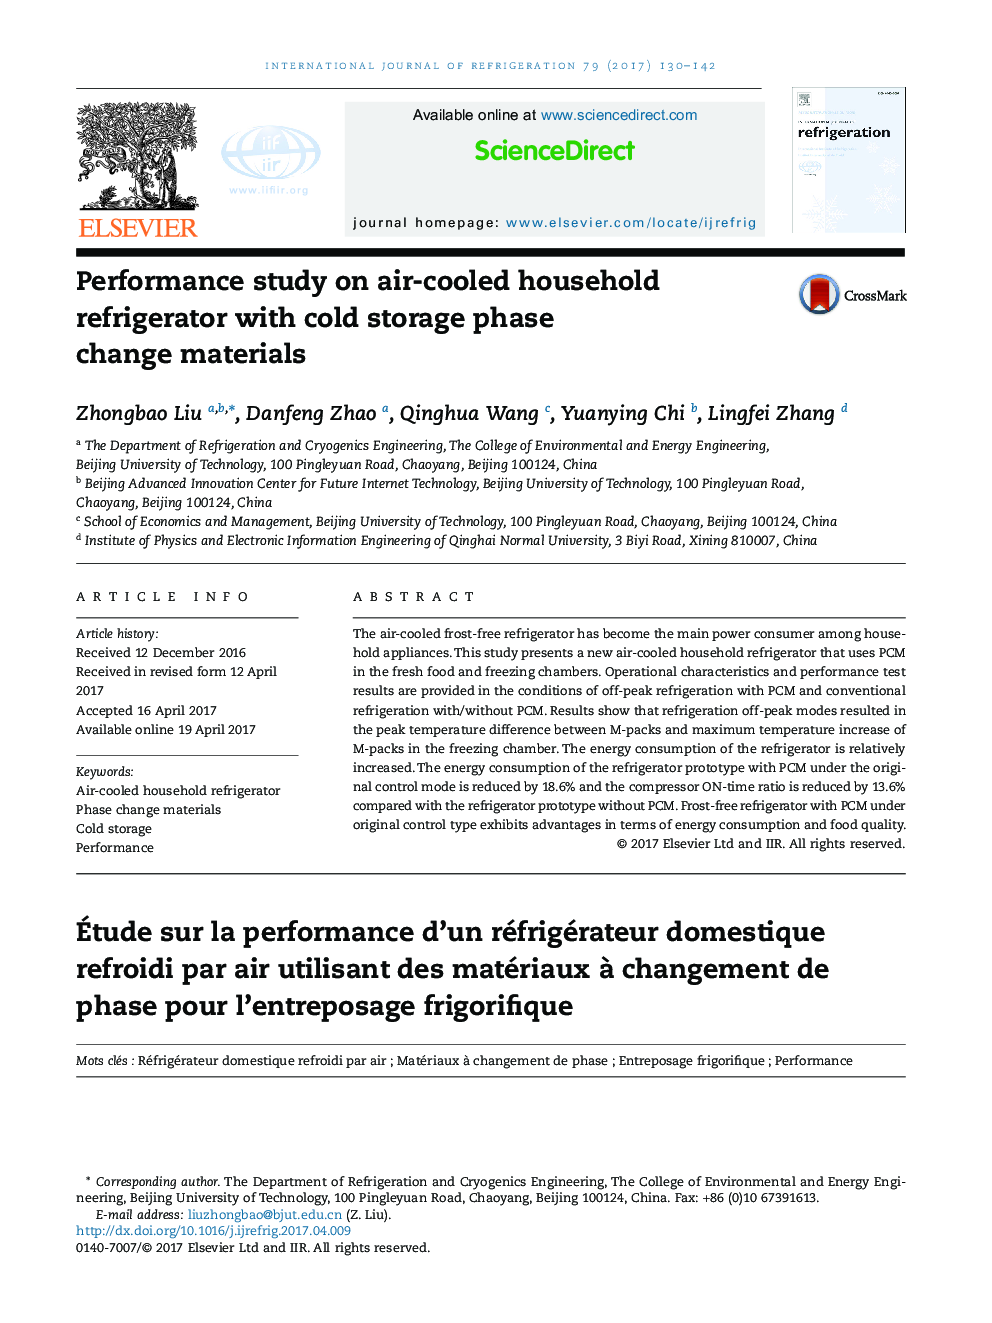 Performance study on air-cooled household refrigerator with cold storage phase change materials